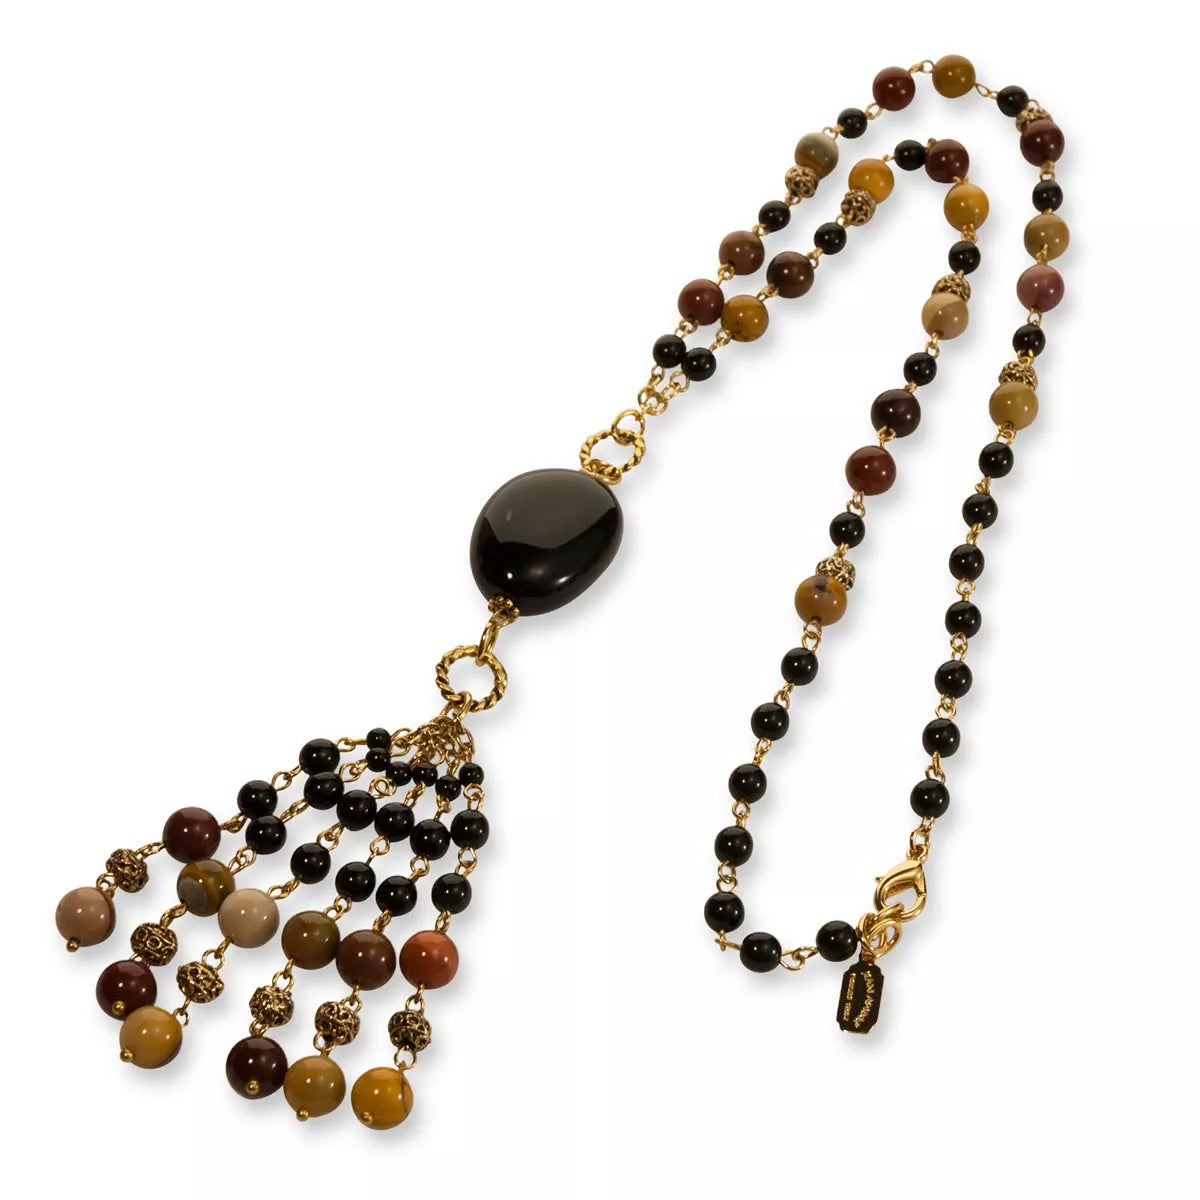 Long necklace of semiprecious stones and glass